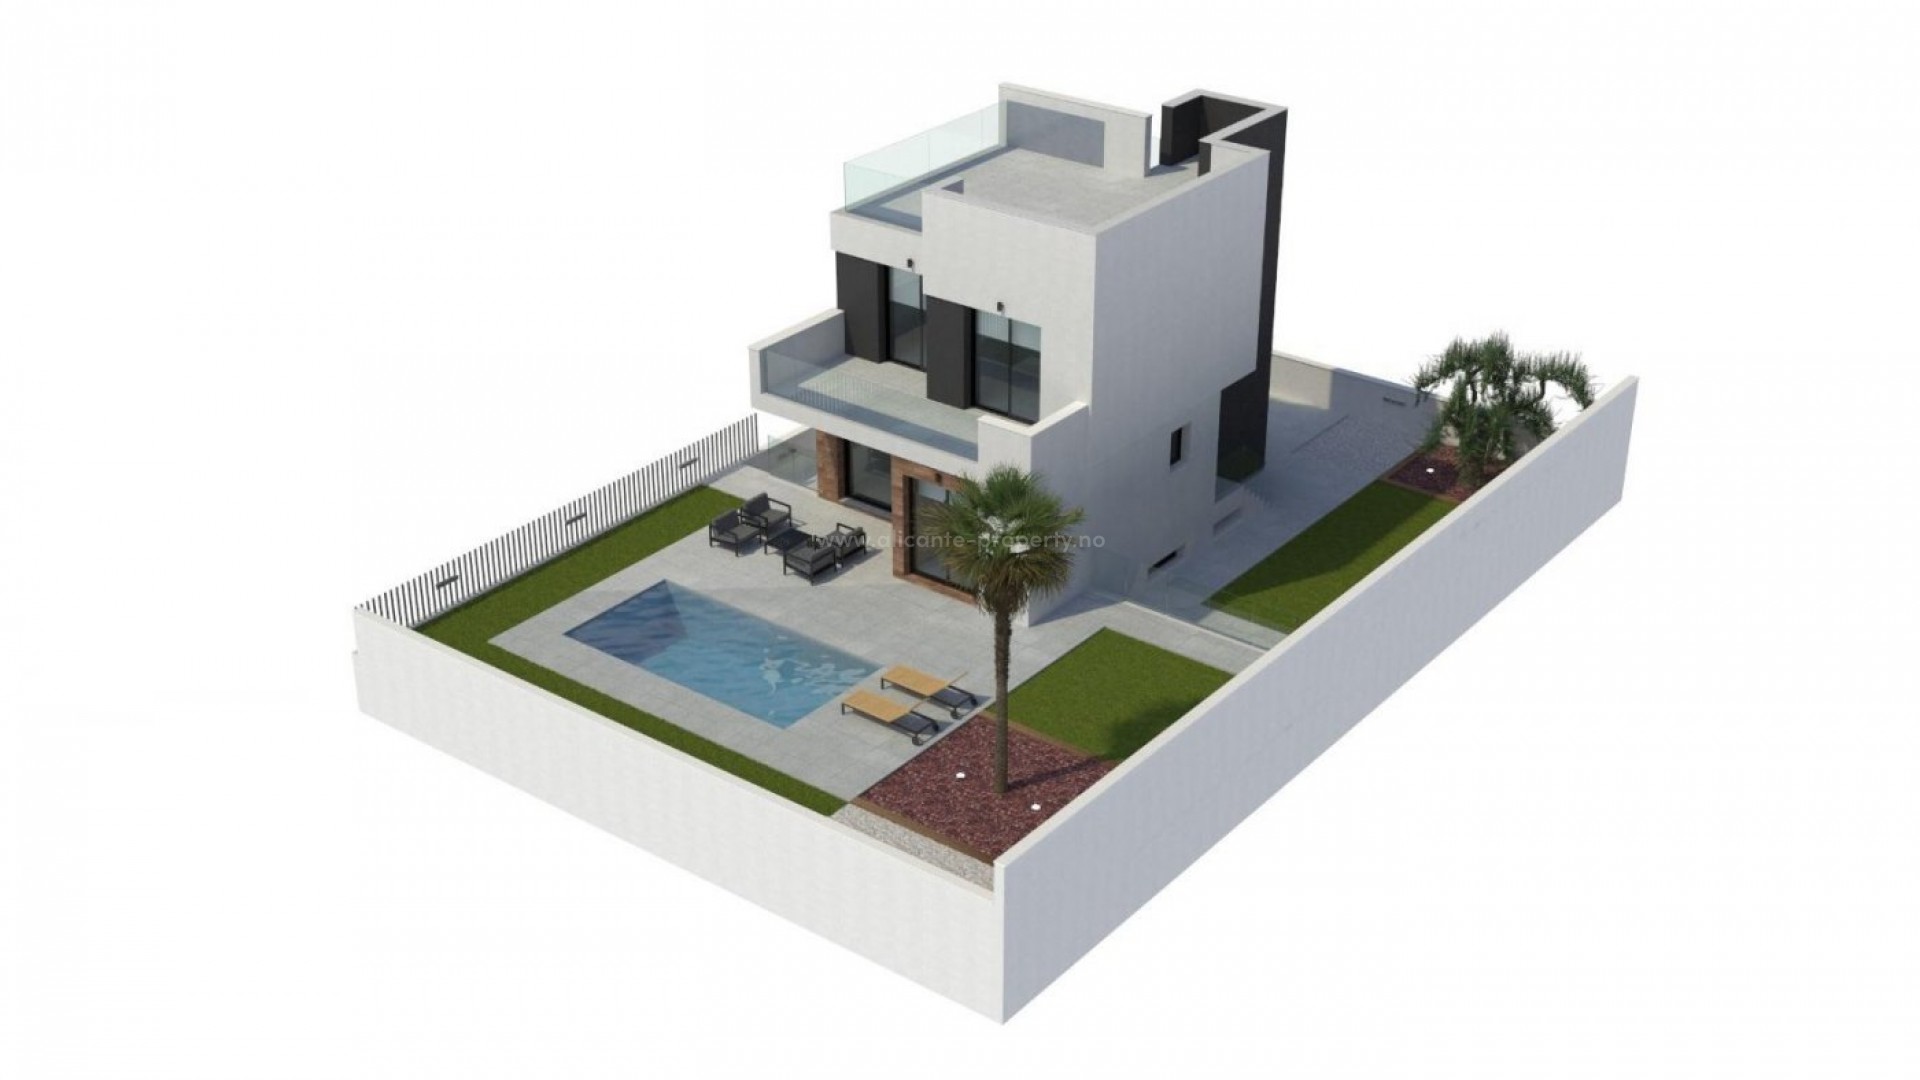 New houses/villas in La Nucia near Benidorm, 3 large bedrooms, 4 bathrooms, private pool, terrace, solarium and separate garage for 2 cars,